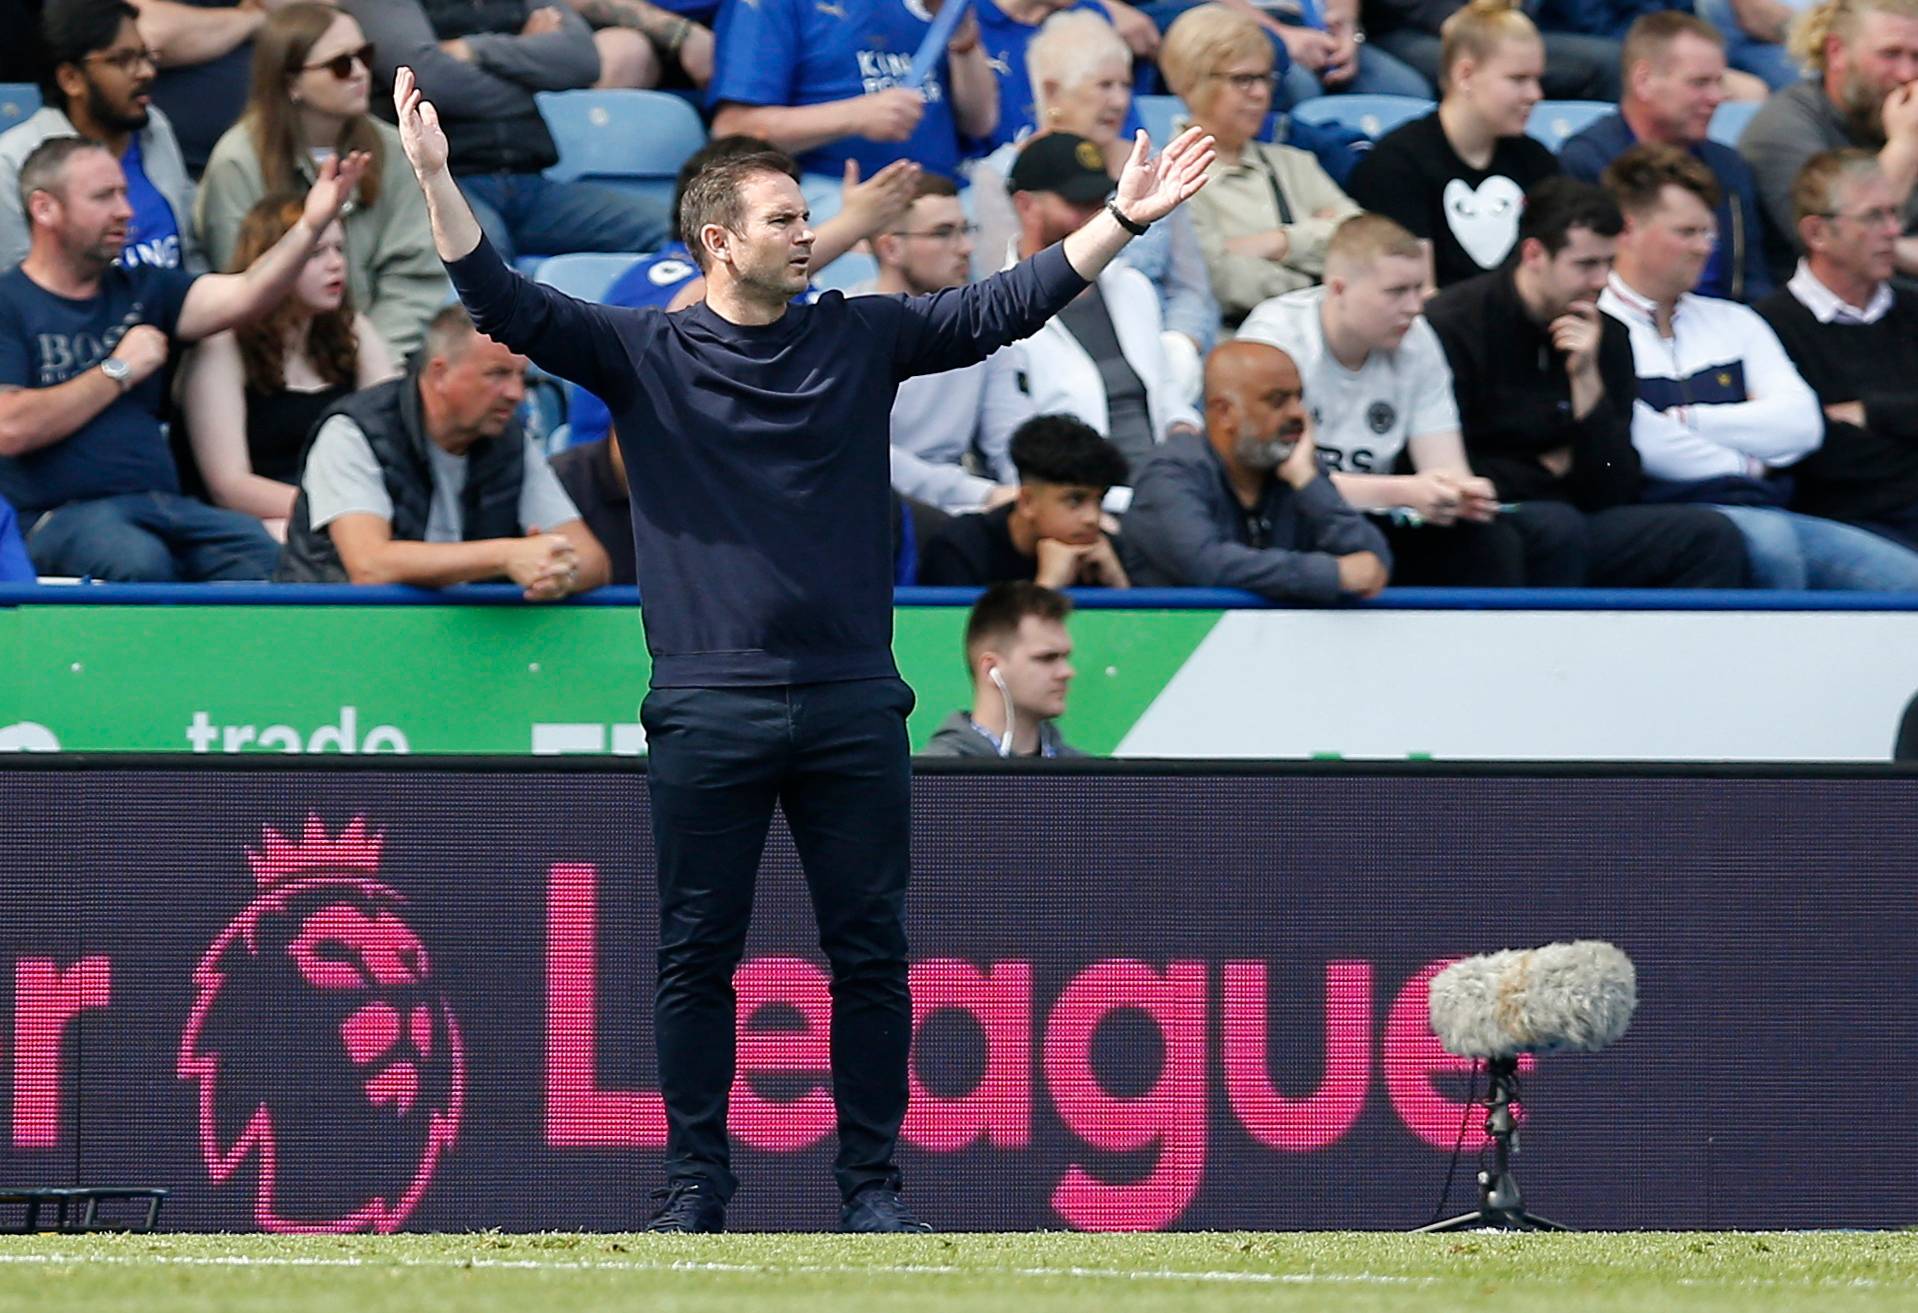 Frank Lampard protesting a decision at a Premier League game for Everton